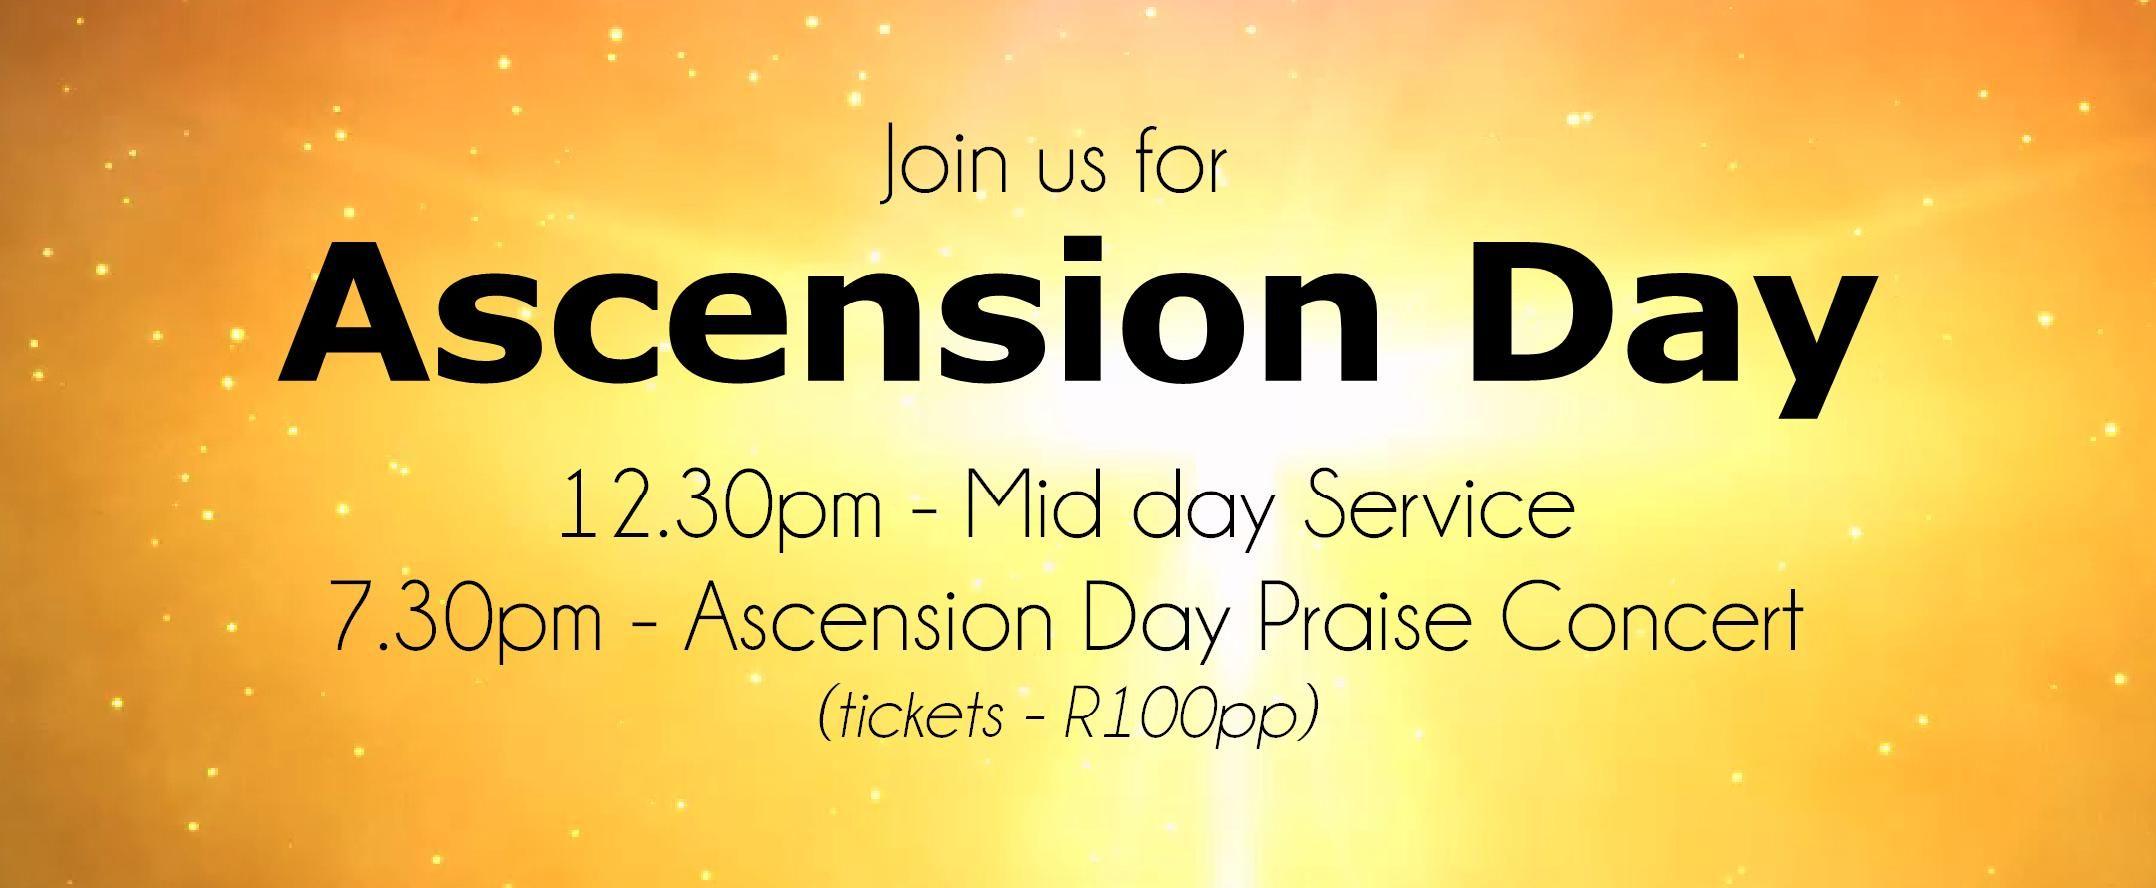 Happy Ascension Day 2017 Prayers HD Image